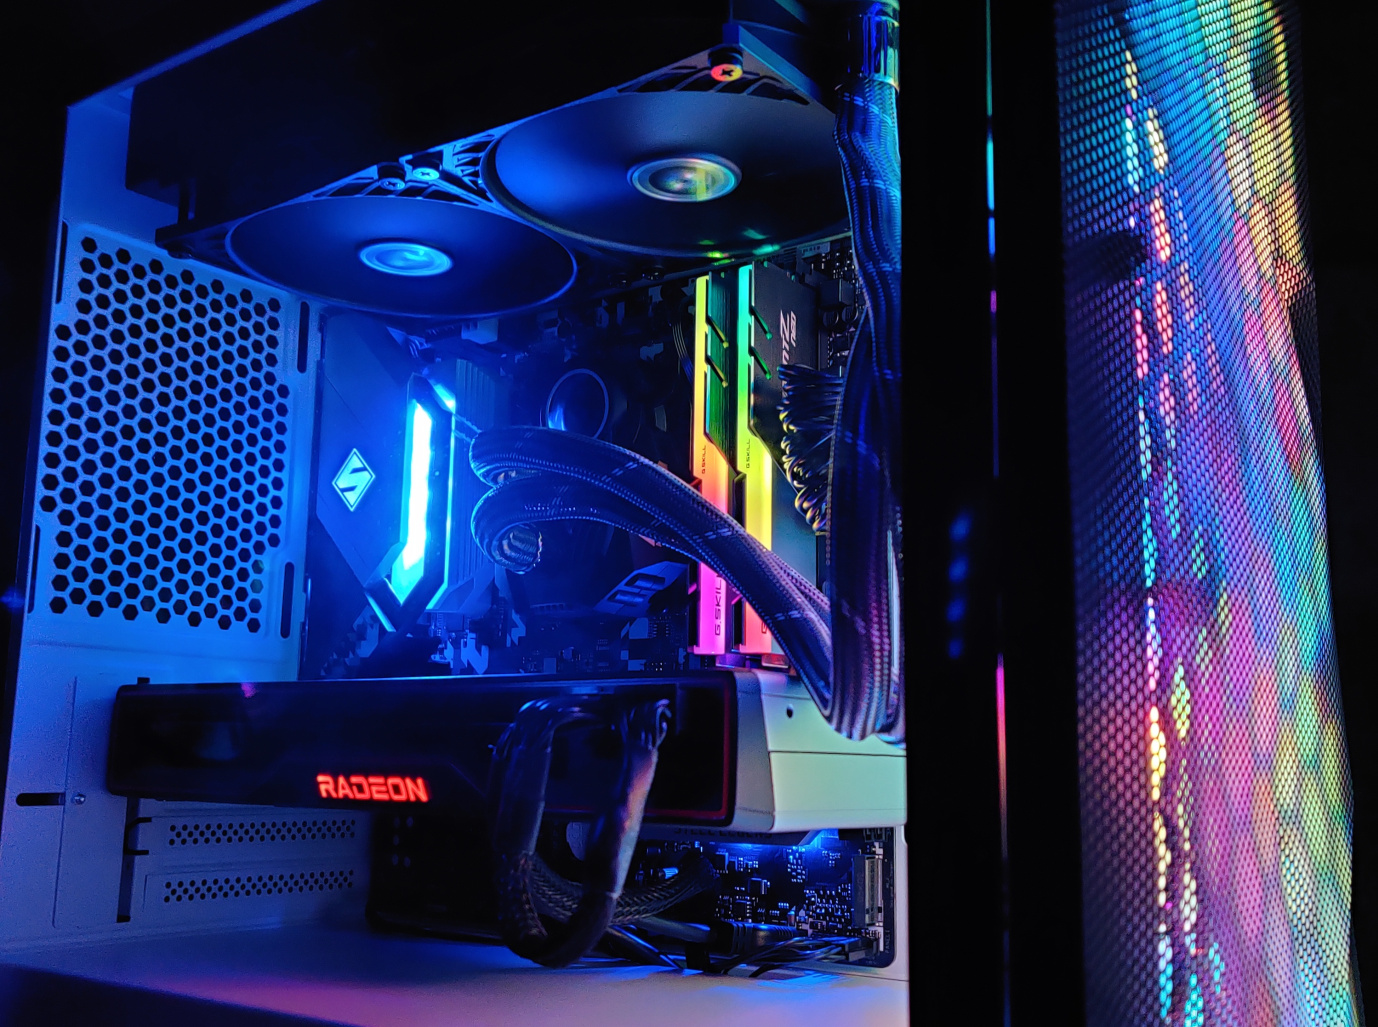 Custom PCs are our passion!